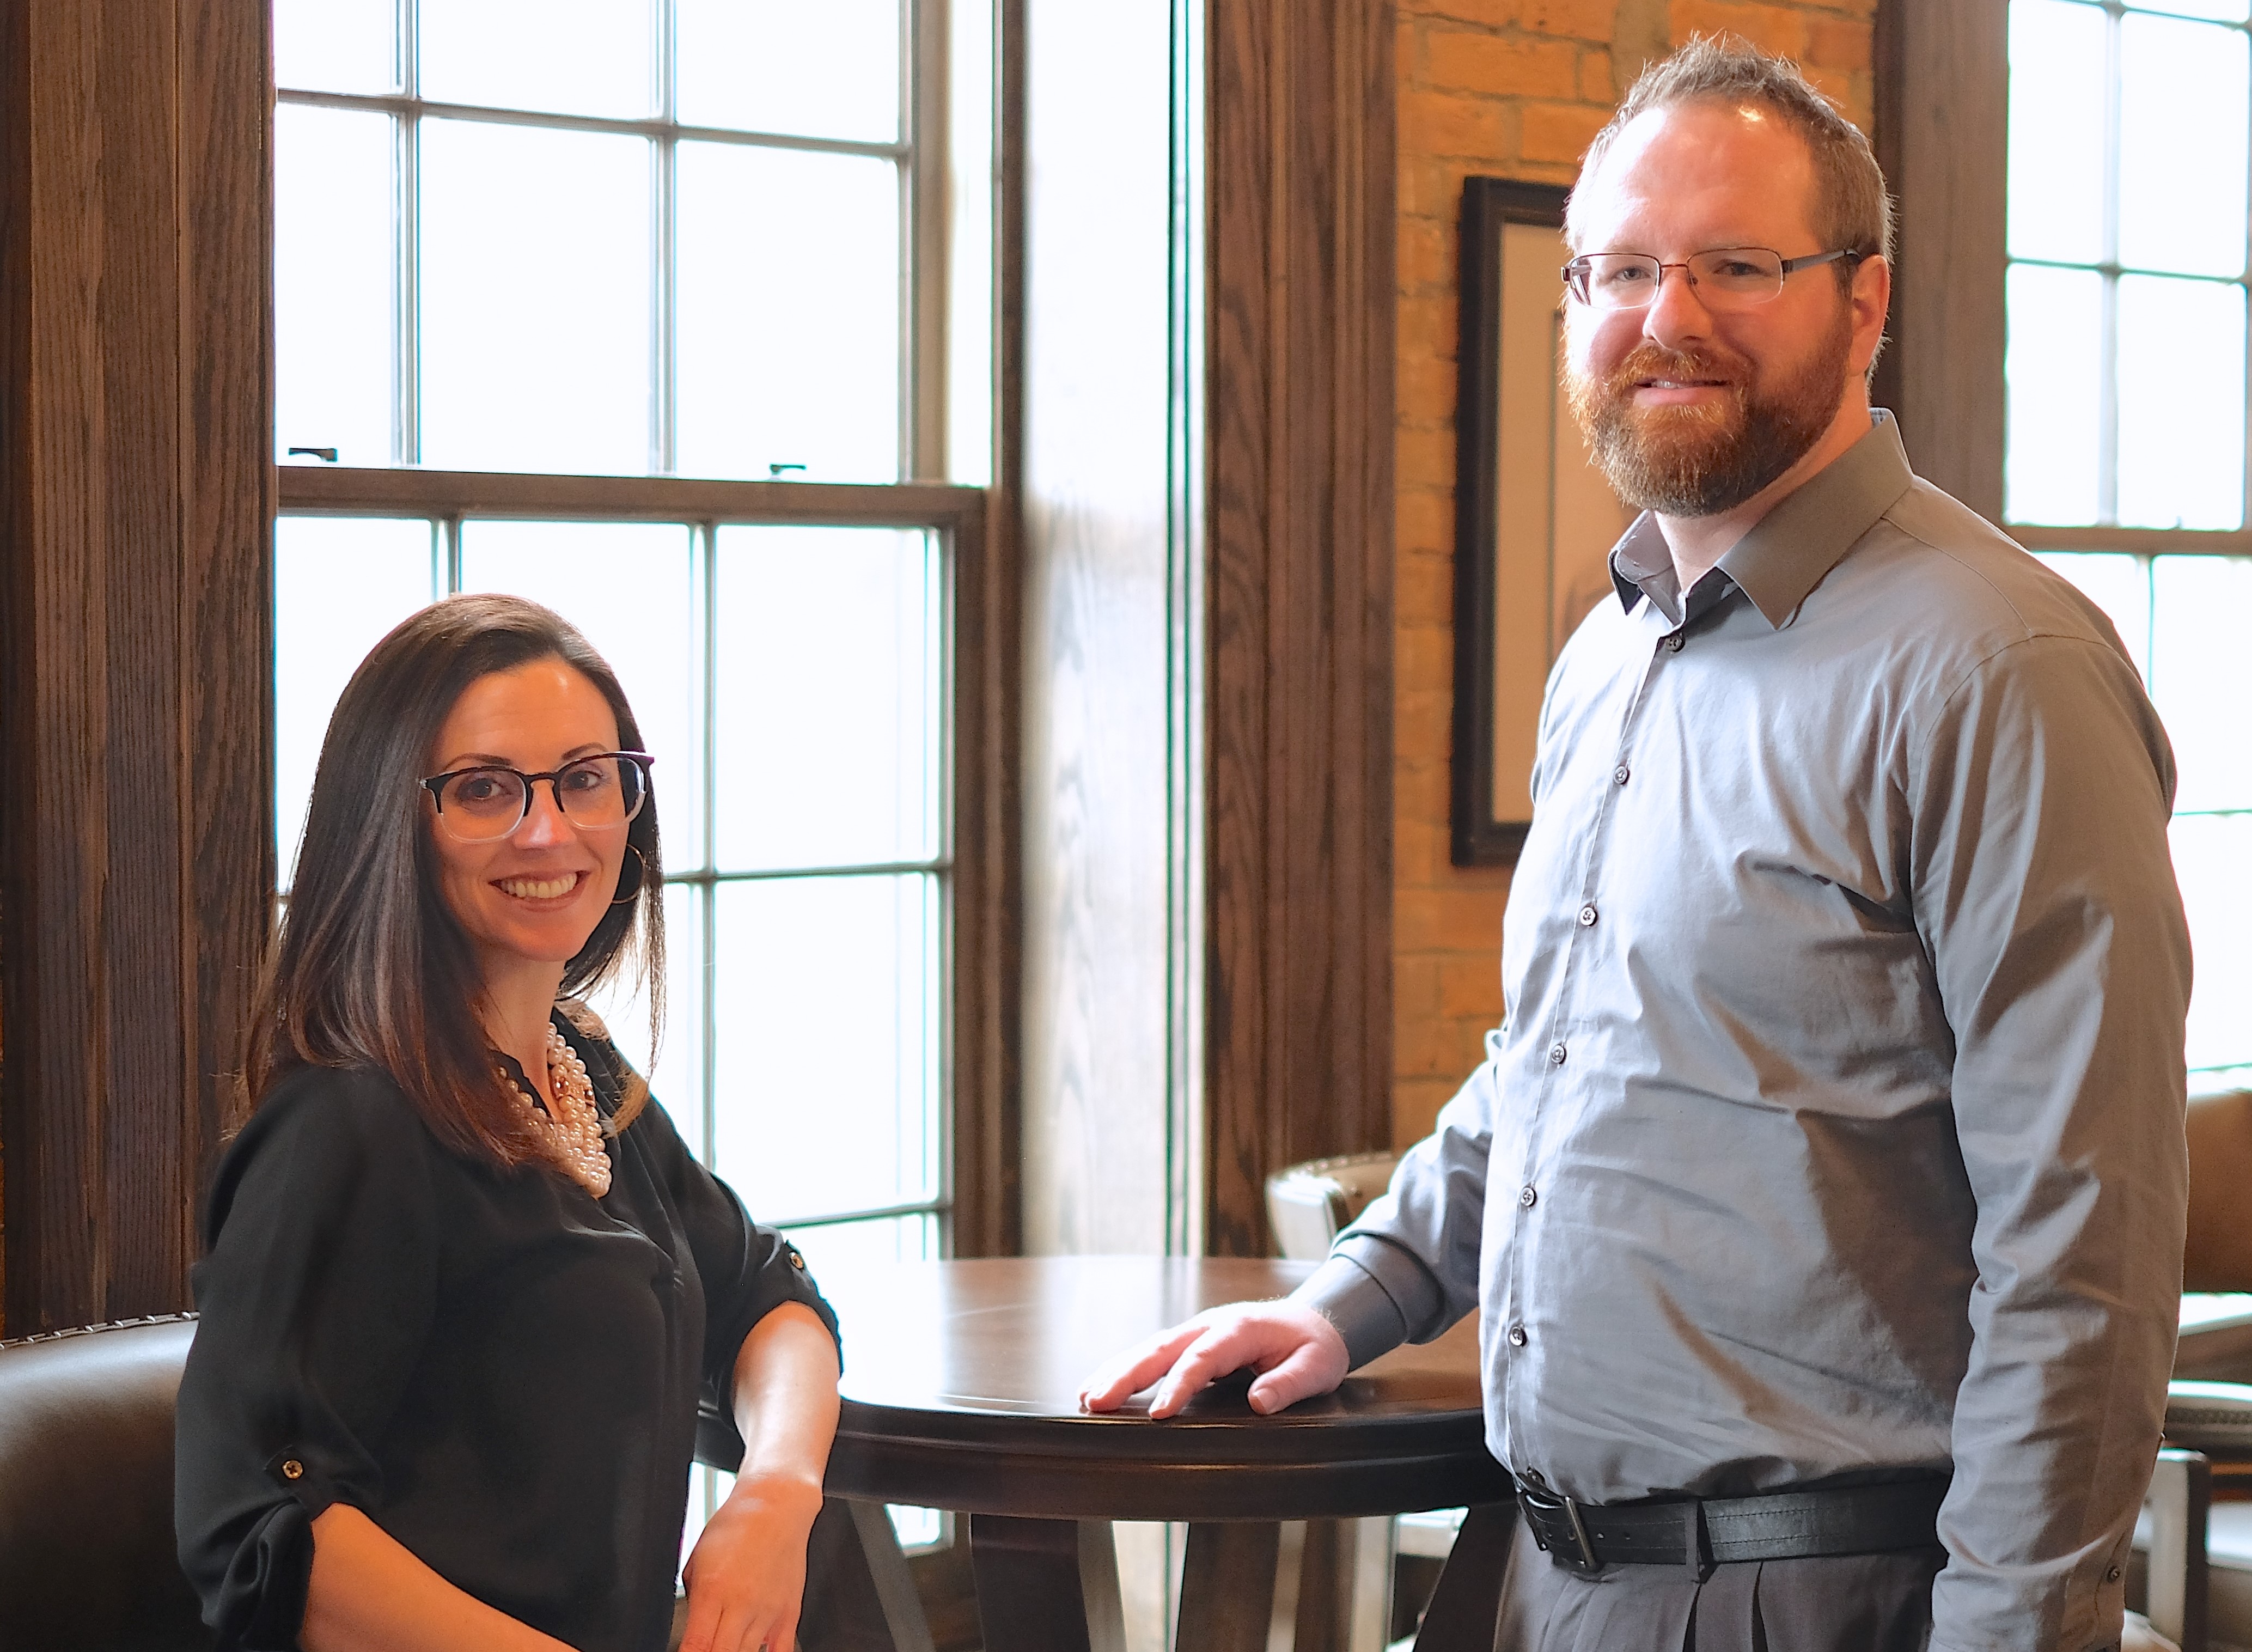 Eric & Chilah provide Michigan HR consulting services